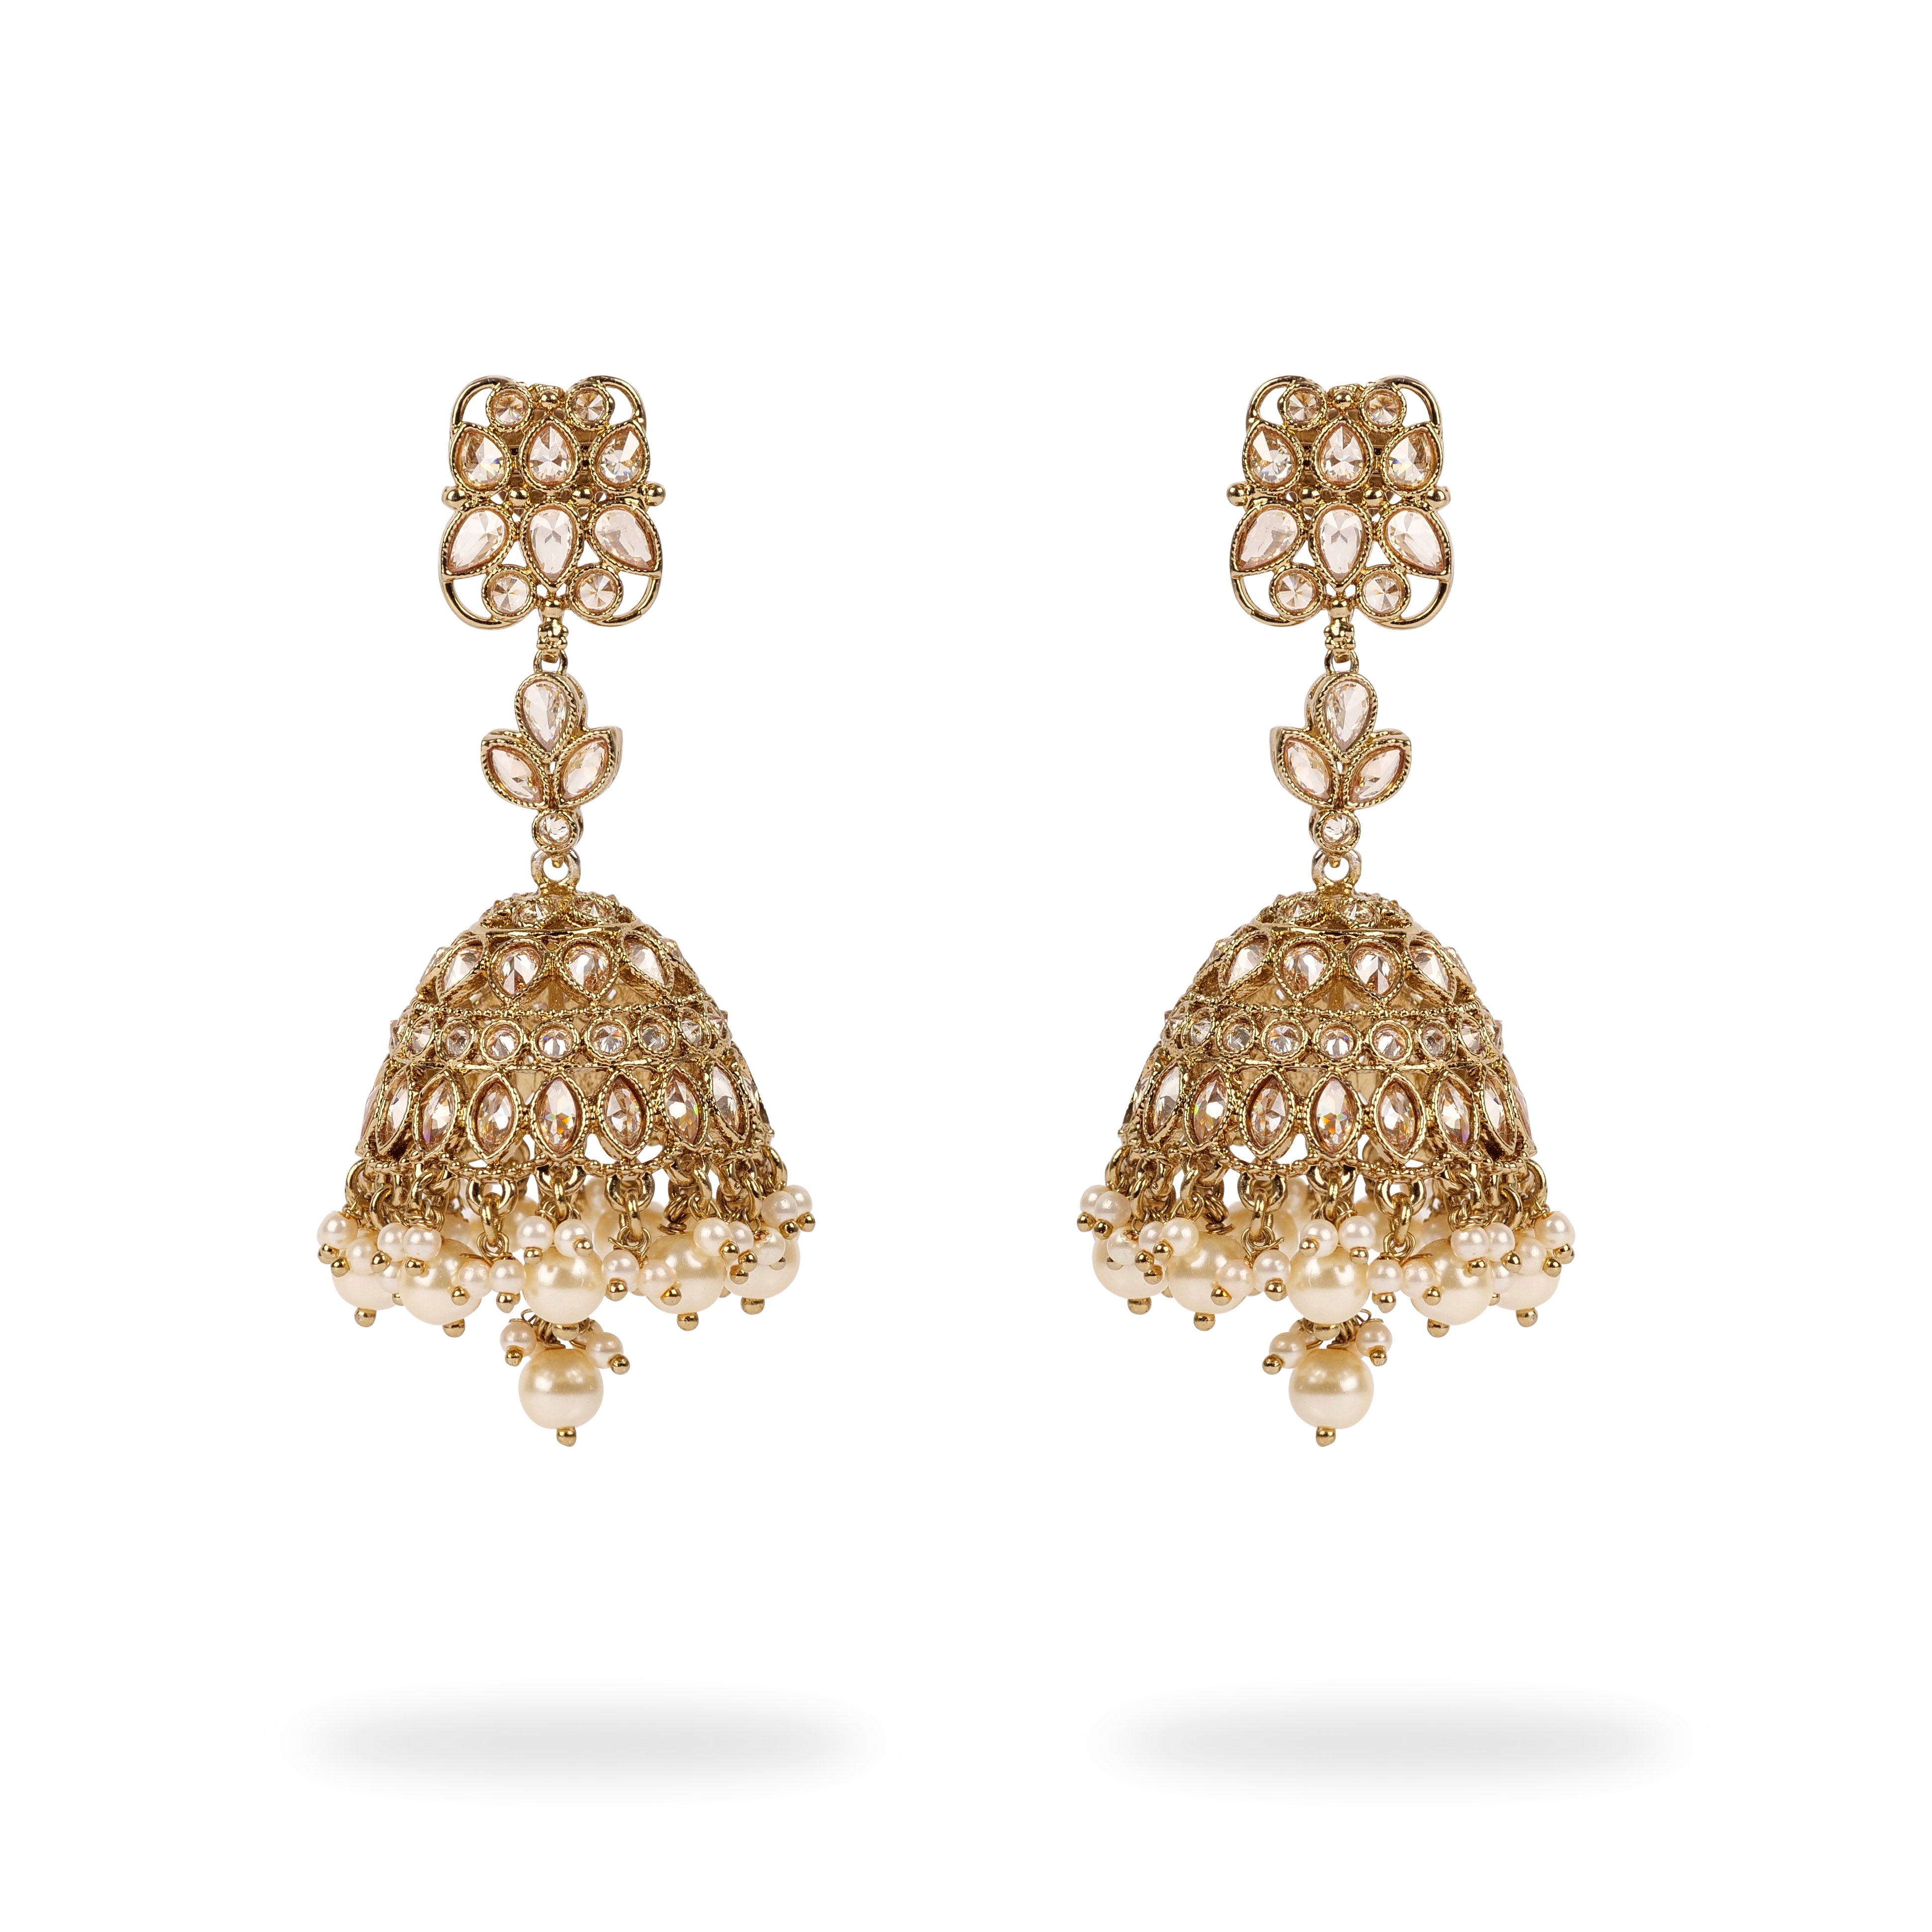 Navi Jhumka Earrings in Pearl and Antique Gold